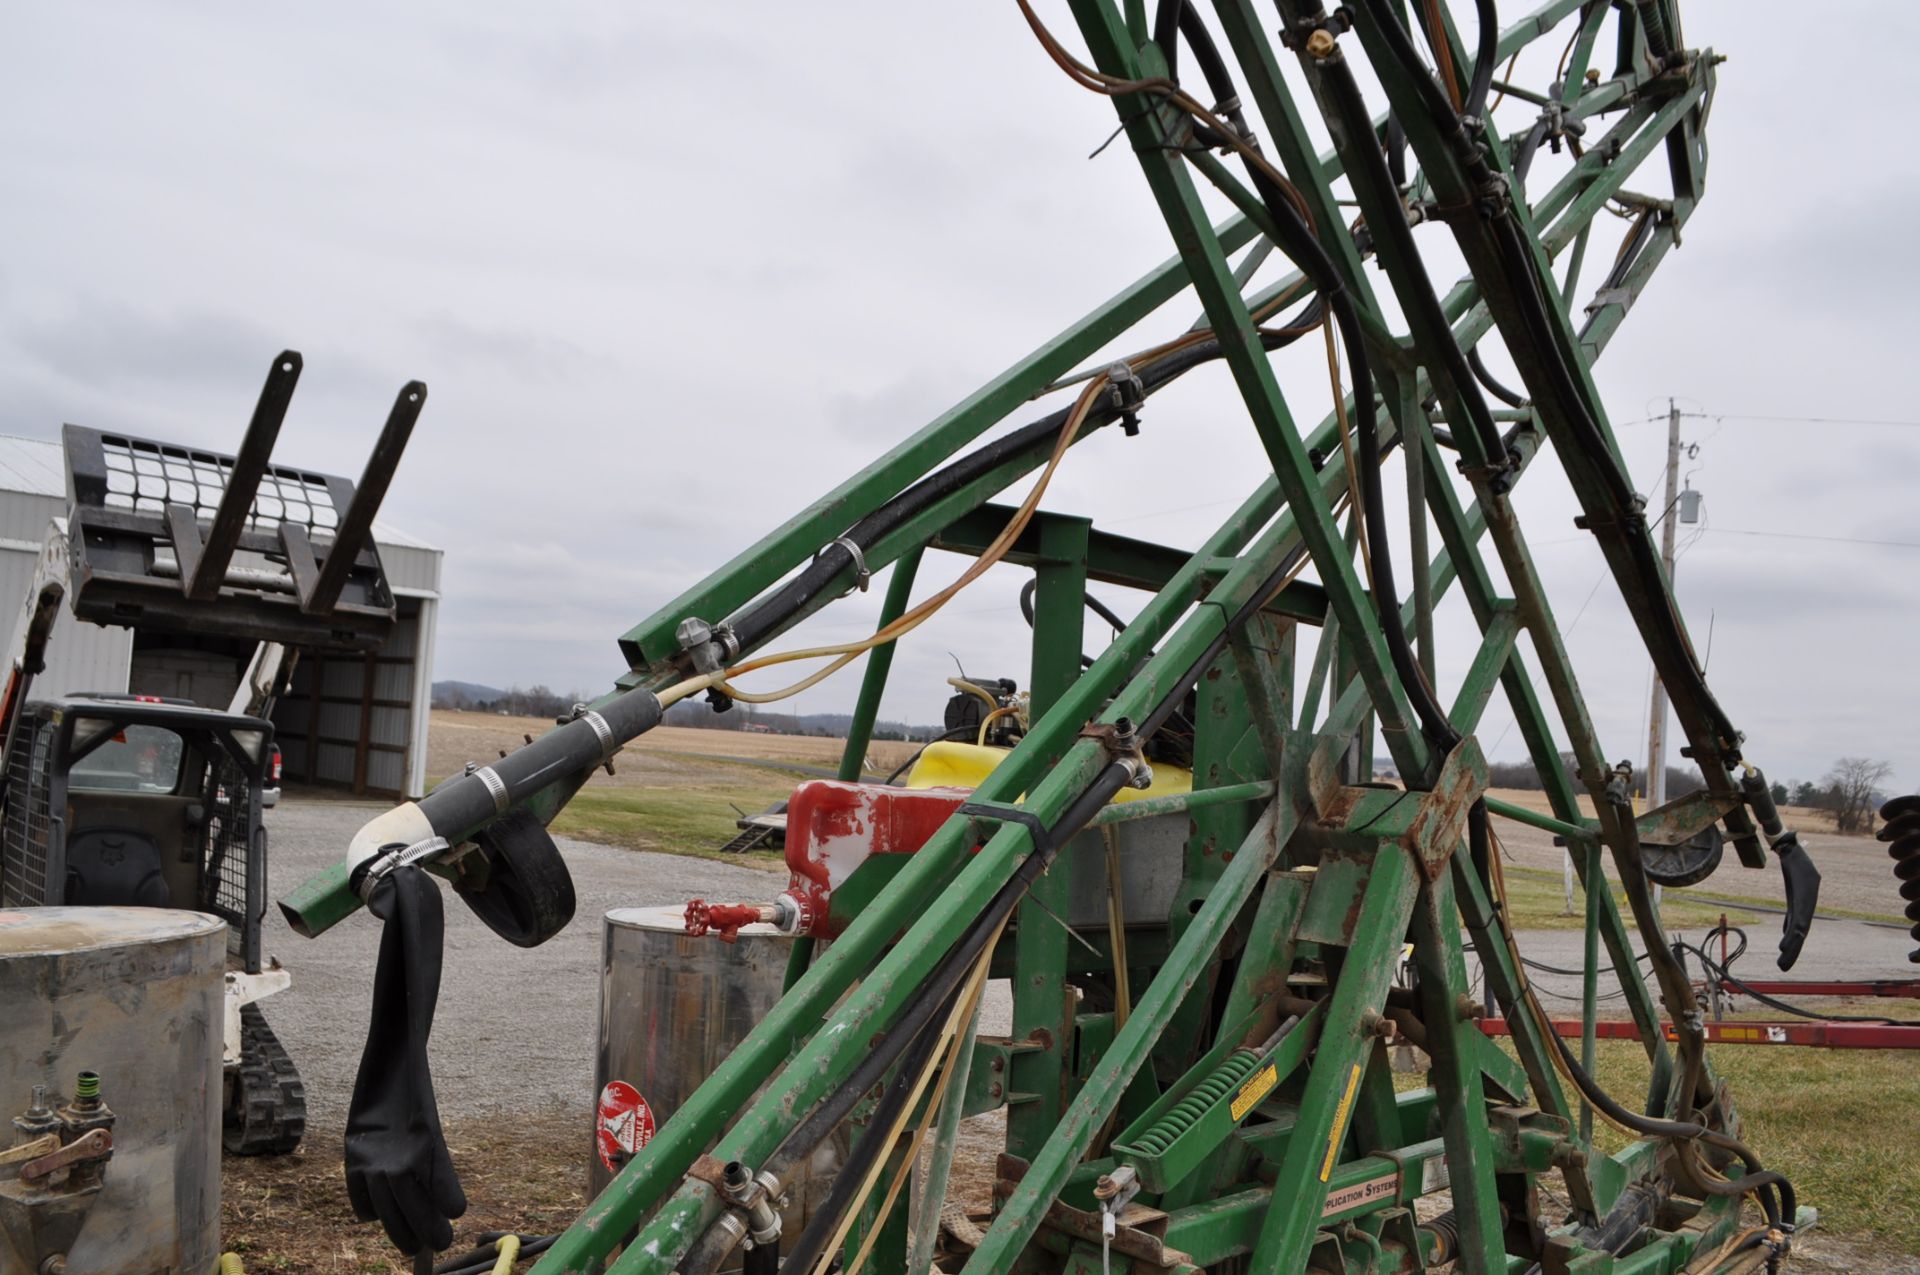 60’ Great Plains 3pt sprayer, hyd fold booms, 30” nozzle spacing, foam markers, sells with Chem Farm - Image 6 of 13